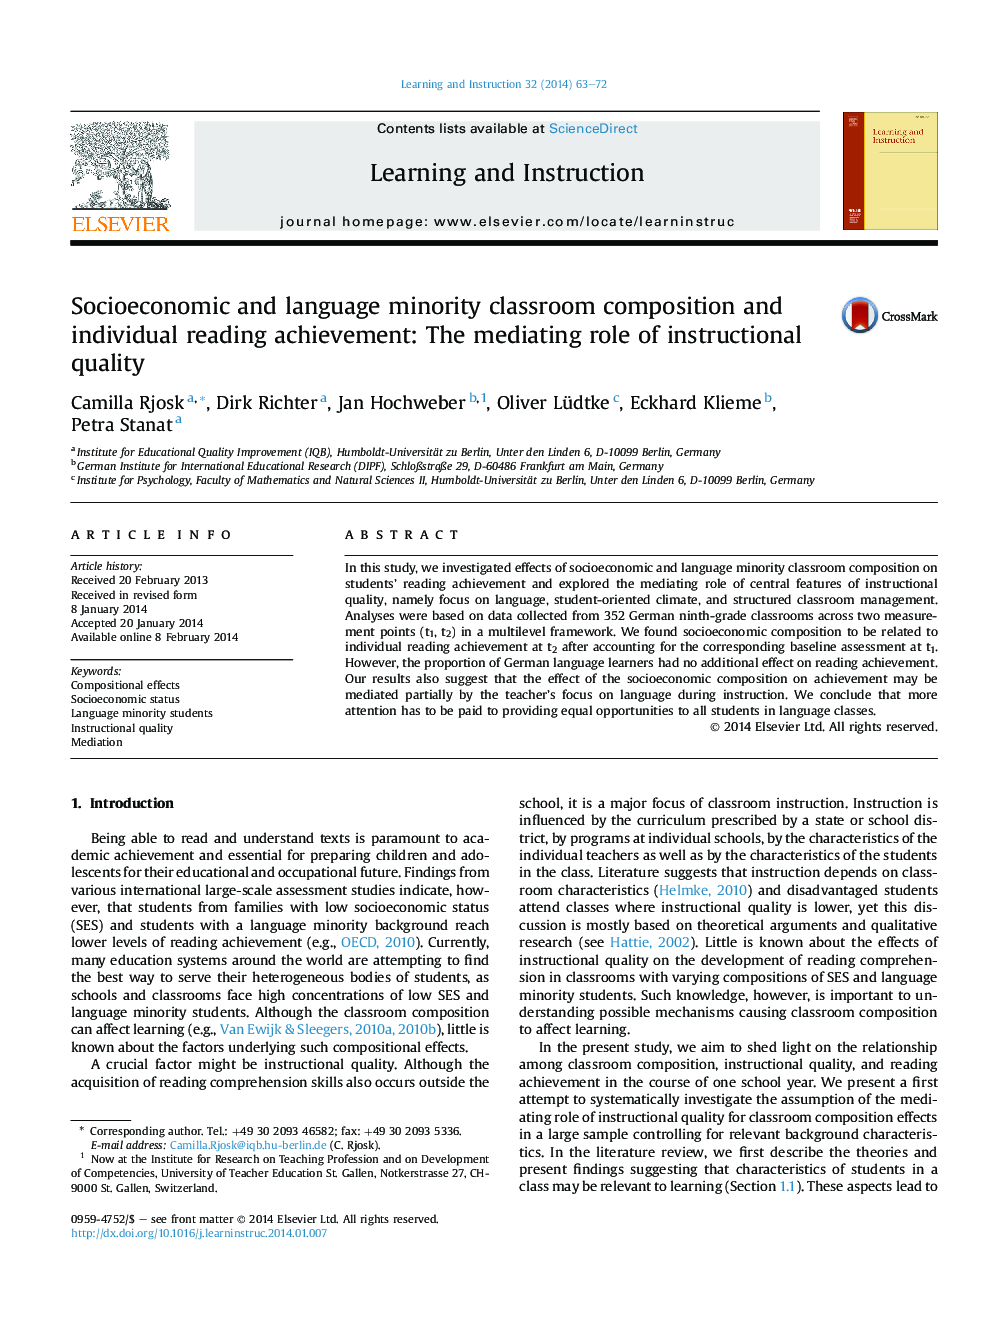 Socioeconomic and language minority classroom composition and individual reading achievement: The mediating role of instructional quality